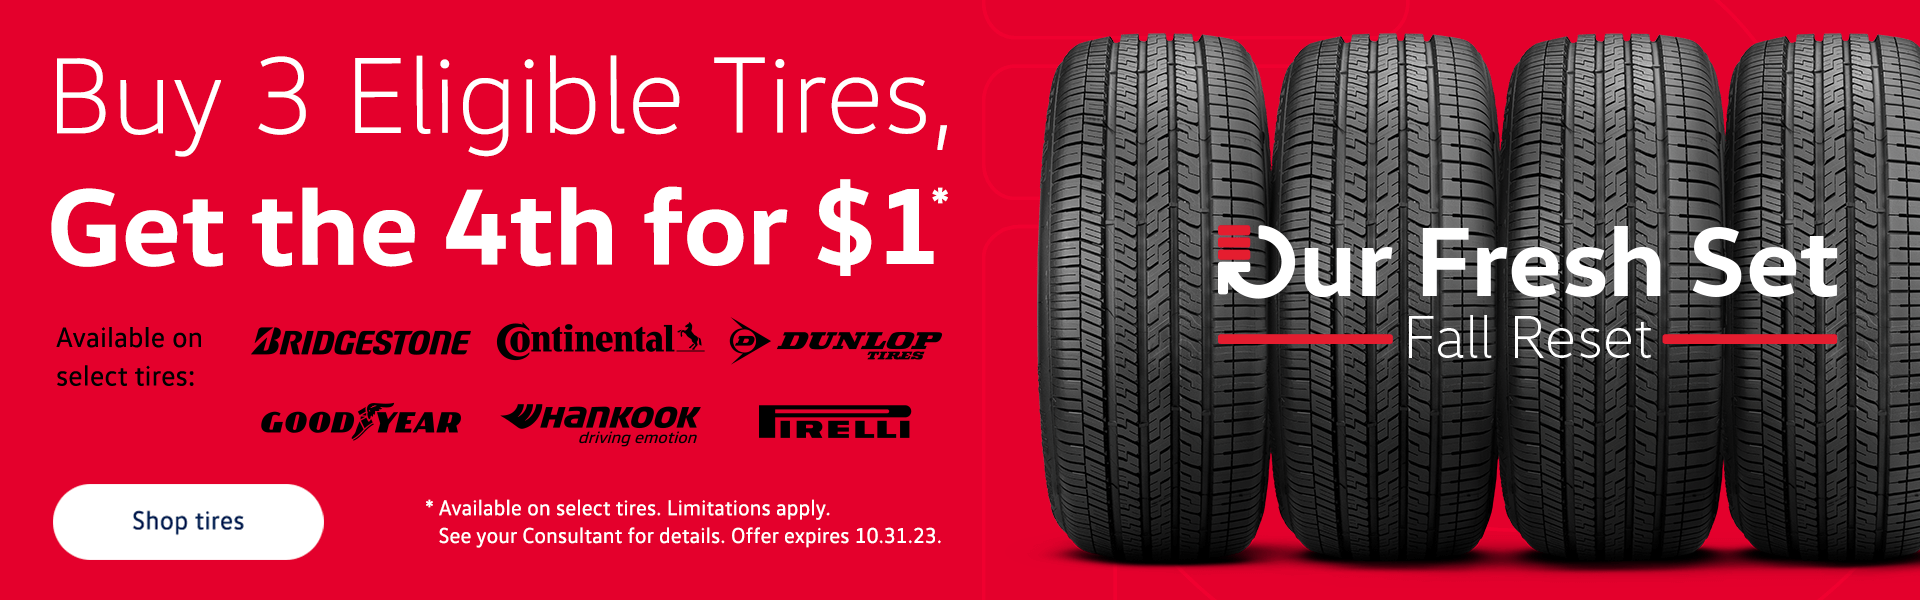 Buy 3 Eligible Tires, Get the 4th for $1